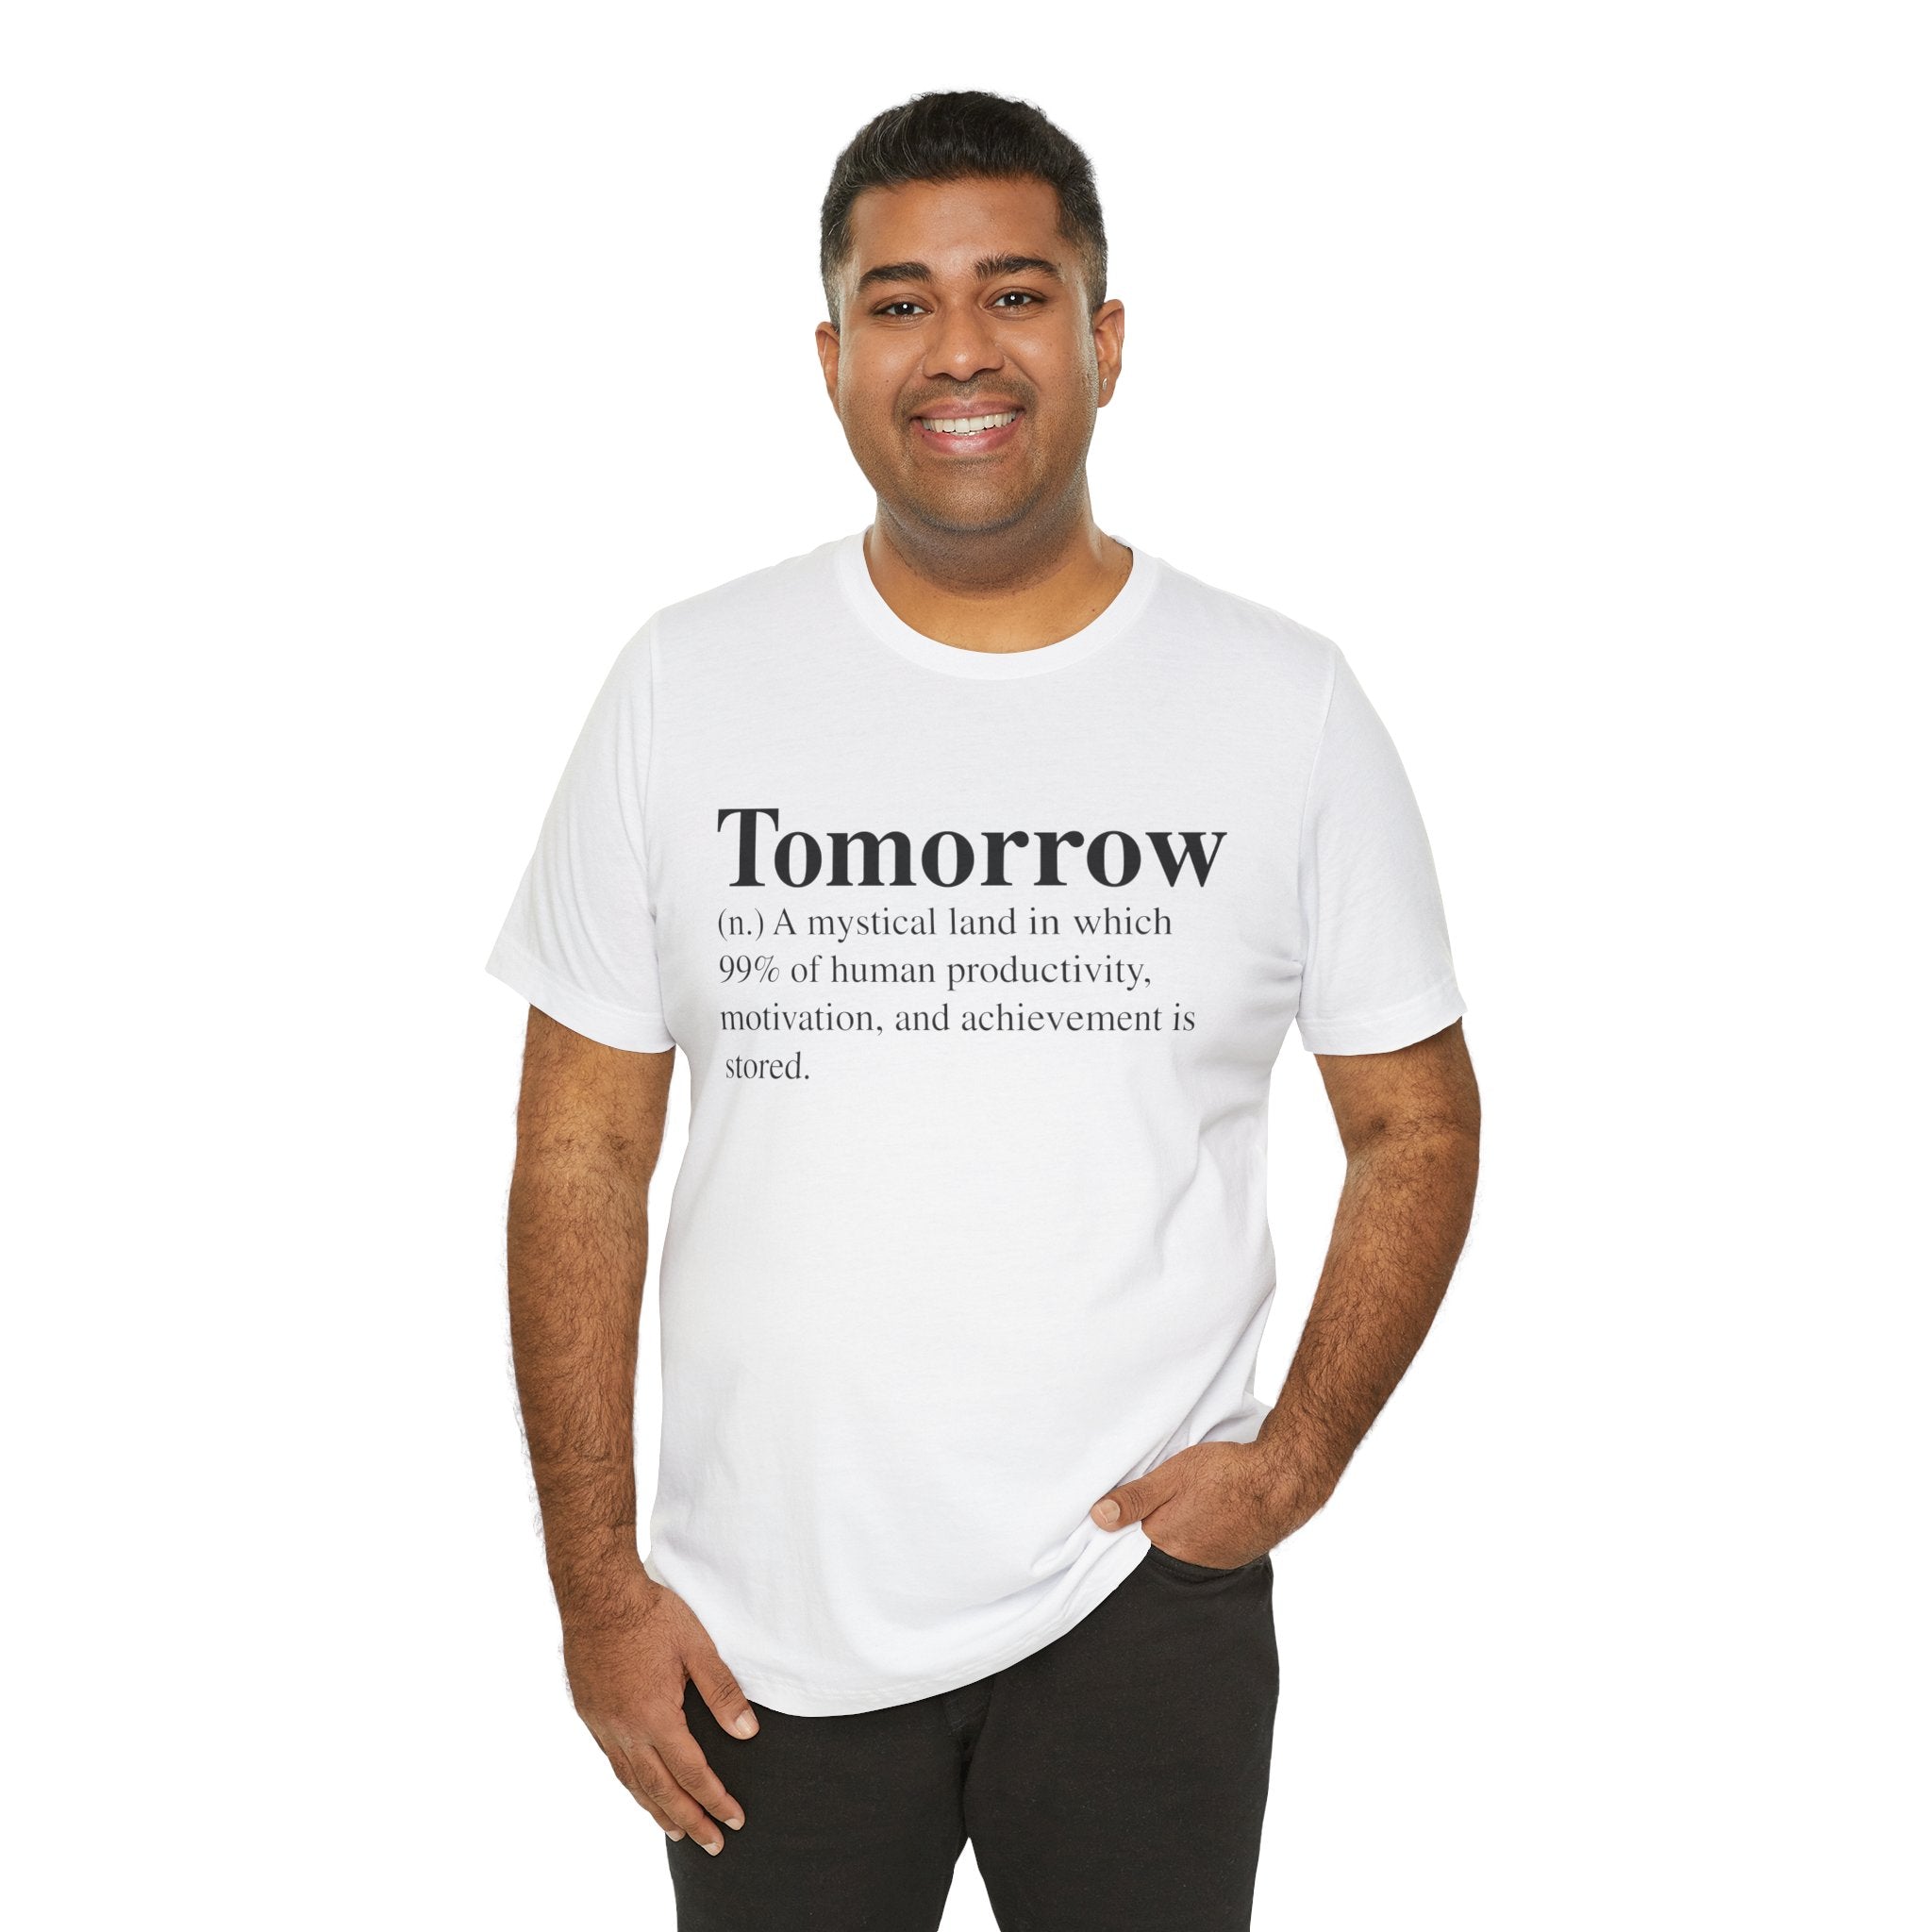 A smiling man in a white unisex 'Tomorrow' T-Shirt with a humorous definition printed on it, standing against a white background.